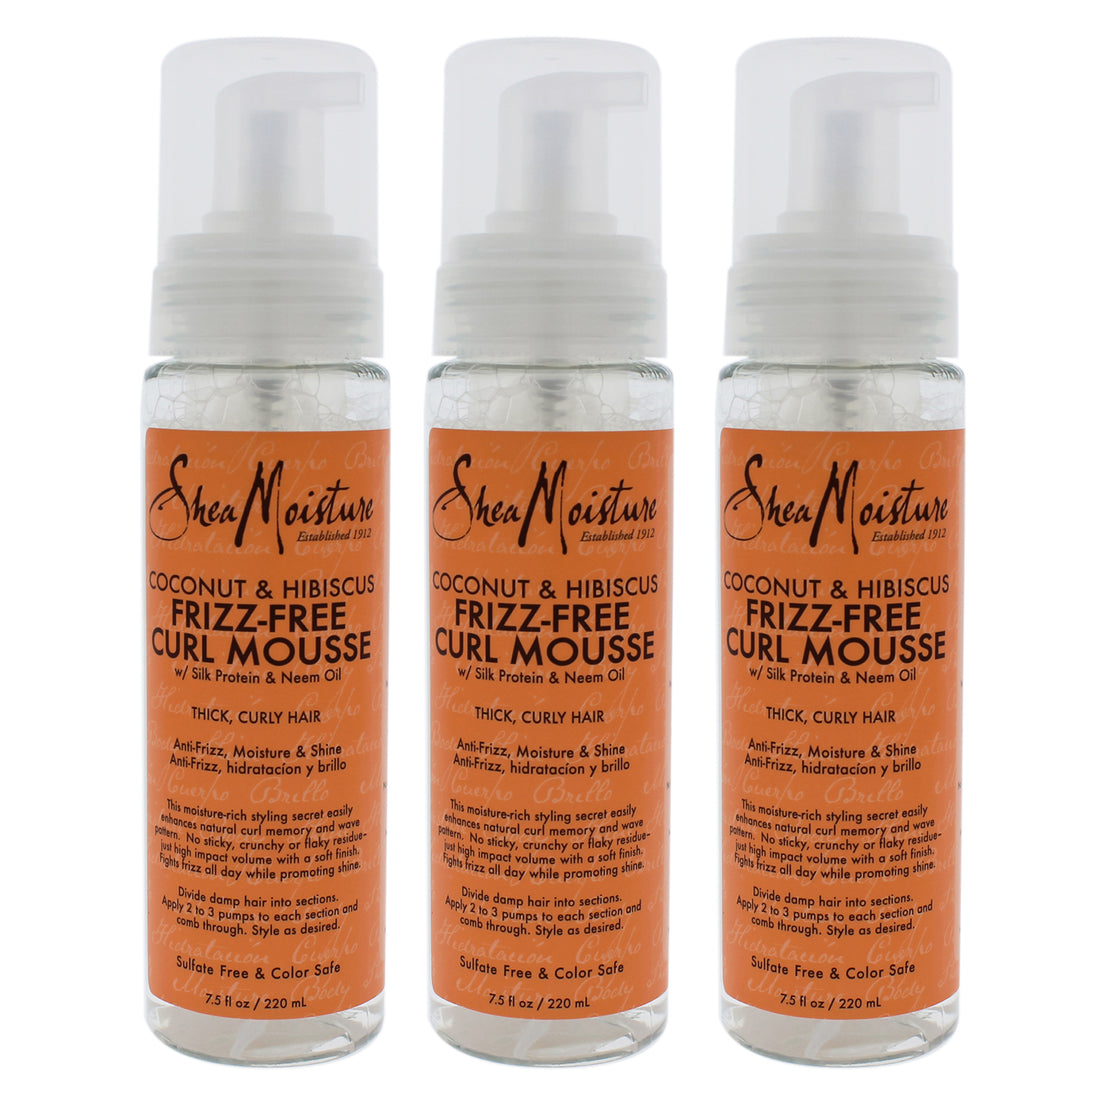 Coconut and Hibiscus Frizz-Free Curl Mousse by Shea Moisture for Unisex - 7.5 oz Mousse - Pack of 3